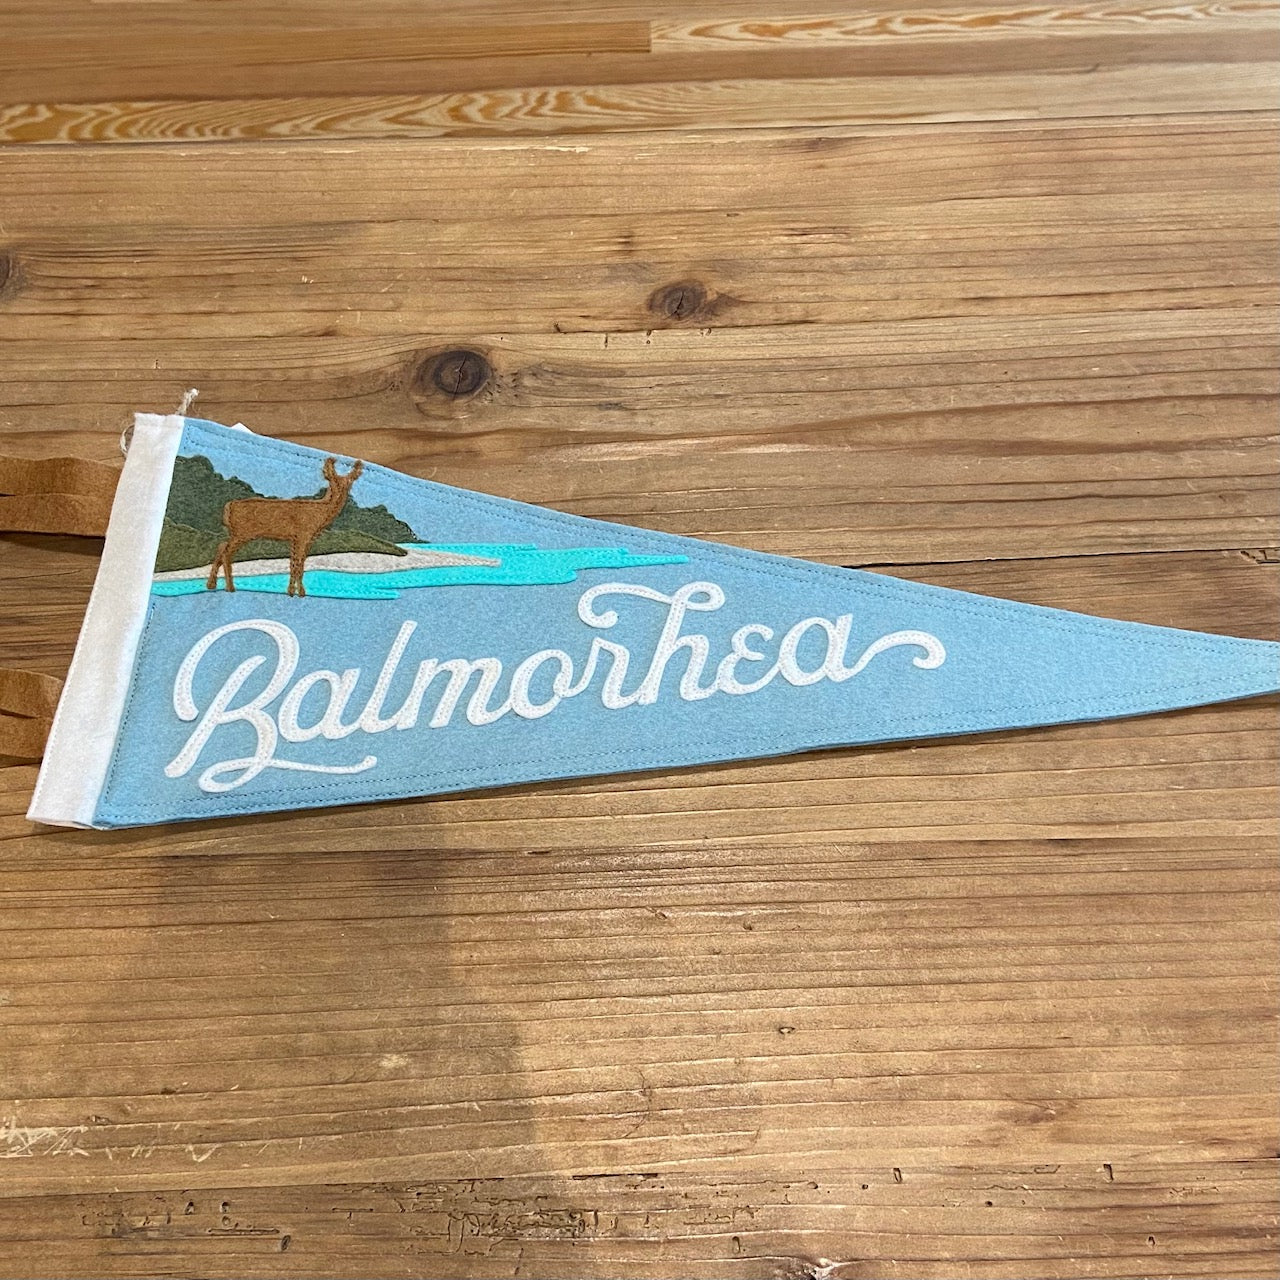 Balmorhea Texas State Park Handmade Felt Pennant at 6Whiskey six whisky  in color light blue featuring deer and water